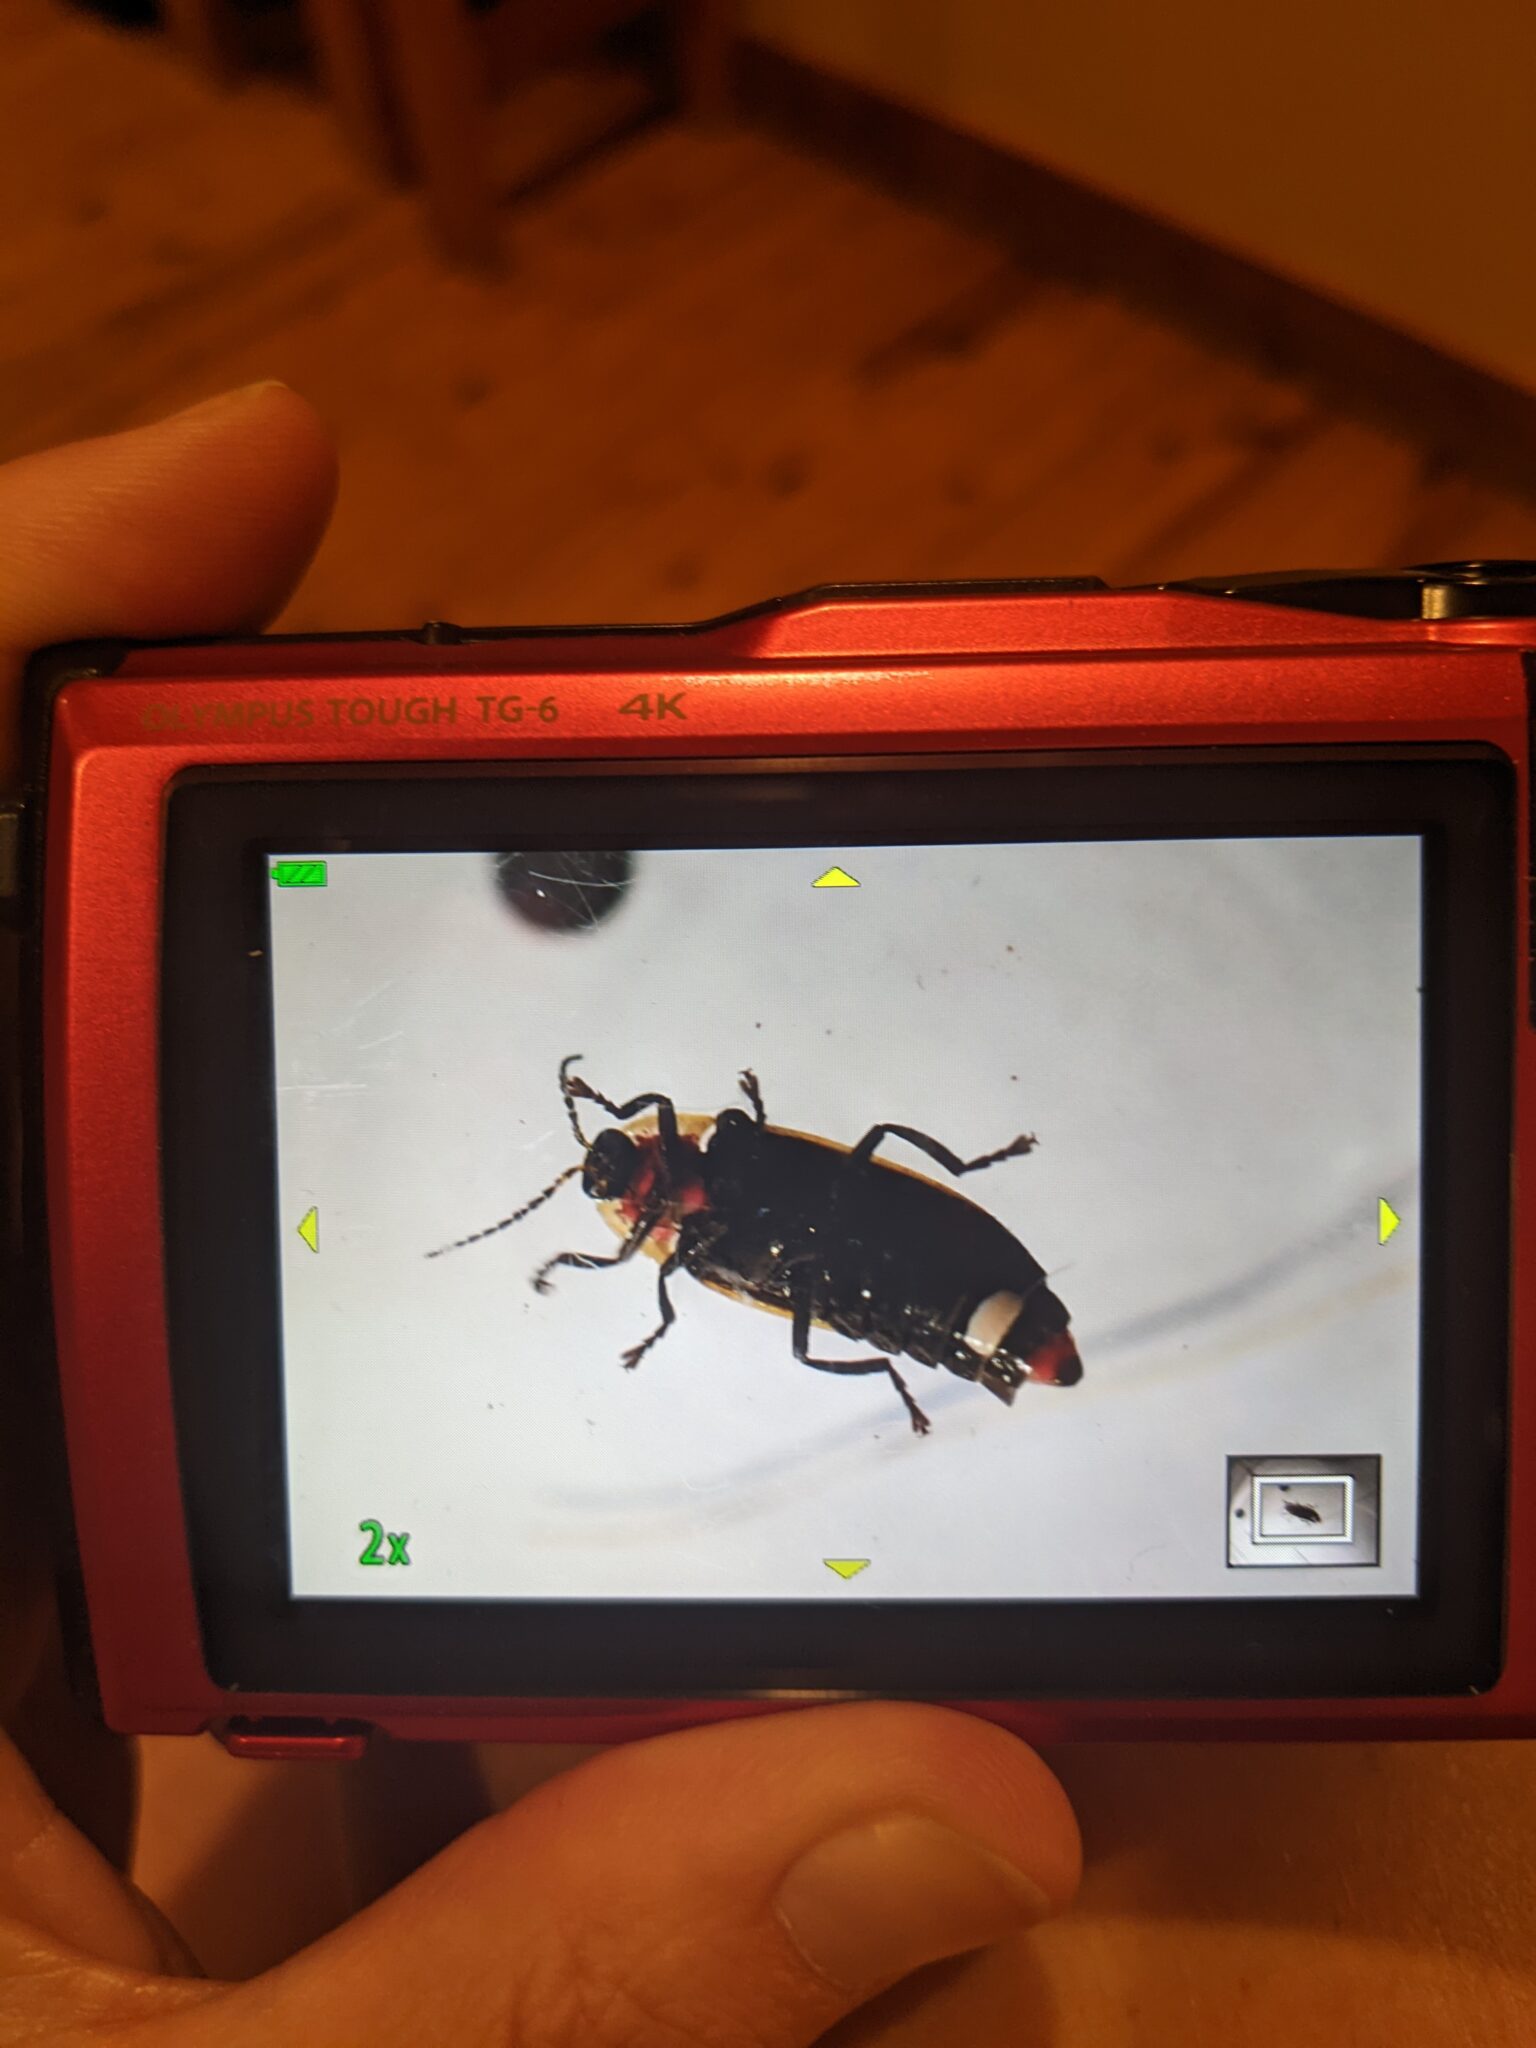 The screen on the back of a red camera shows the image of the underside of a firefly.